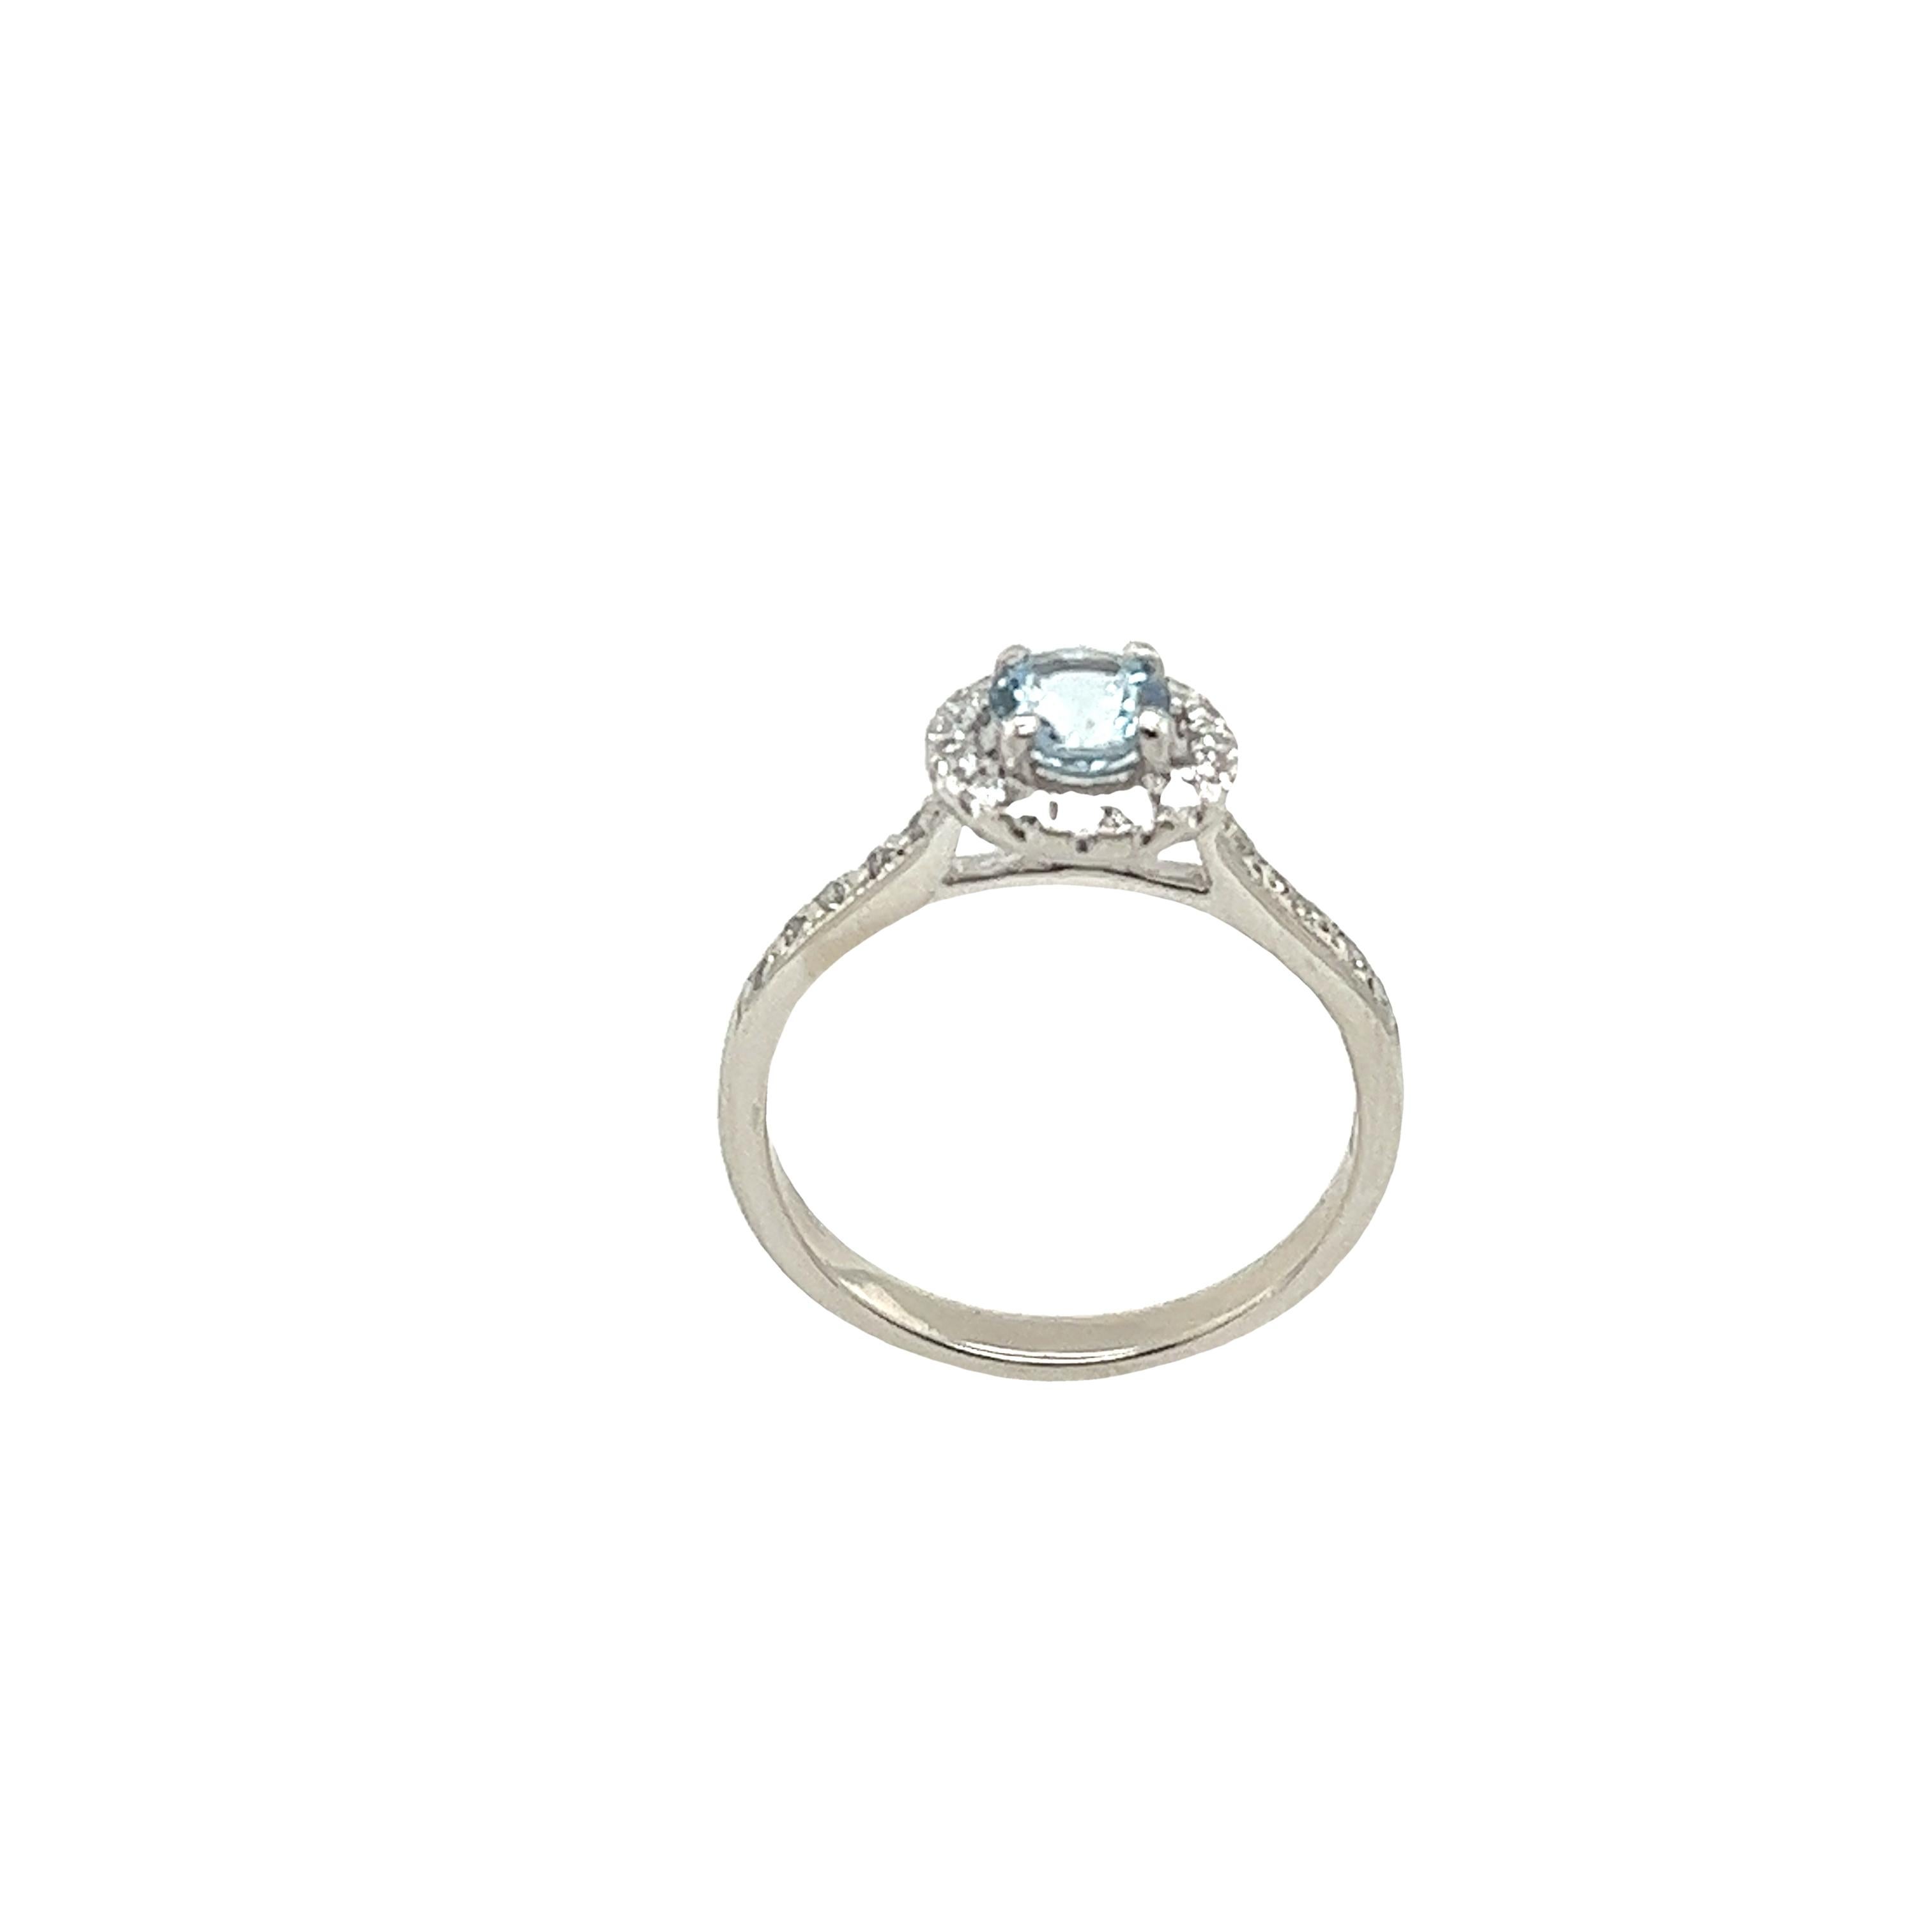 This gorgeous round aquamarine ring is set in platinum setting, with 0.15ct natural round brilliant cut diamonds halo and shoulders. This is a unique and eye-catching ring.
Total Diamond Weight: 0.15ct
Diamond Colour: H
Diamond Clarity: SI
Total